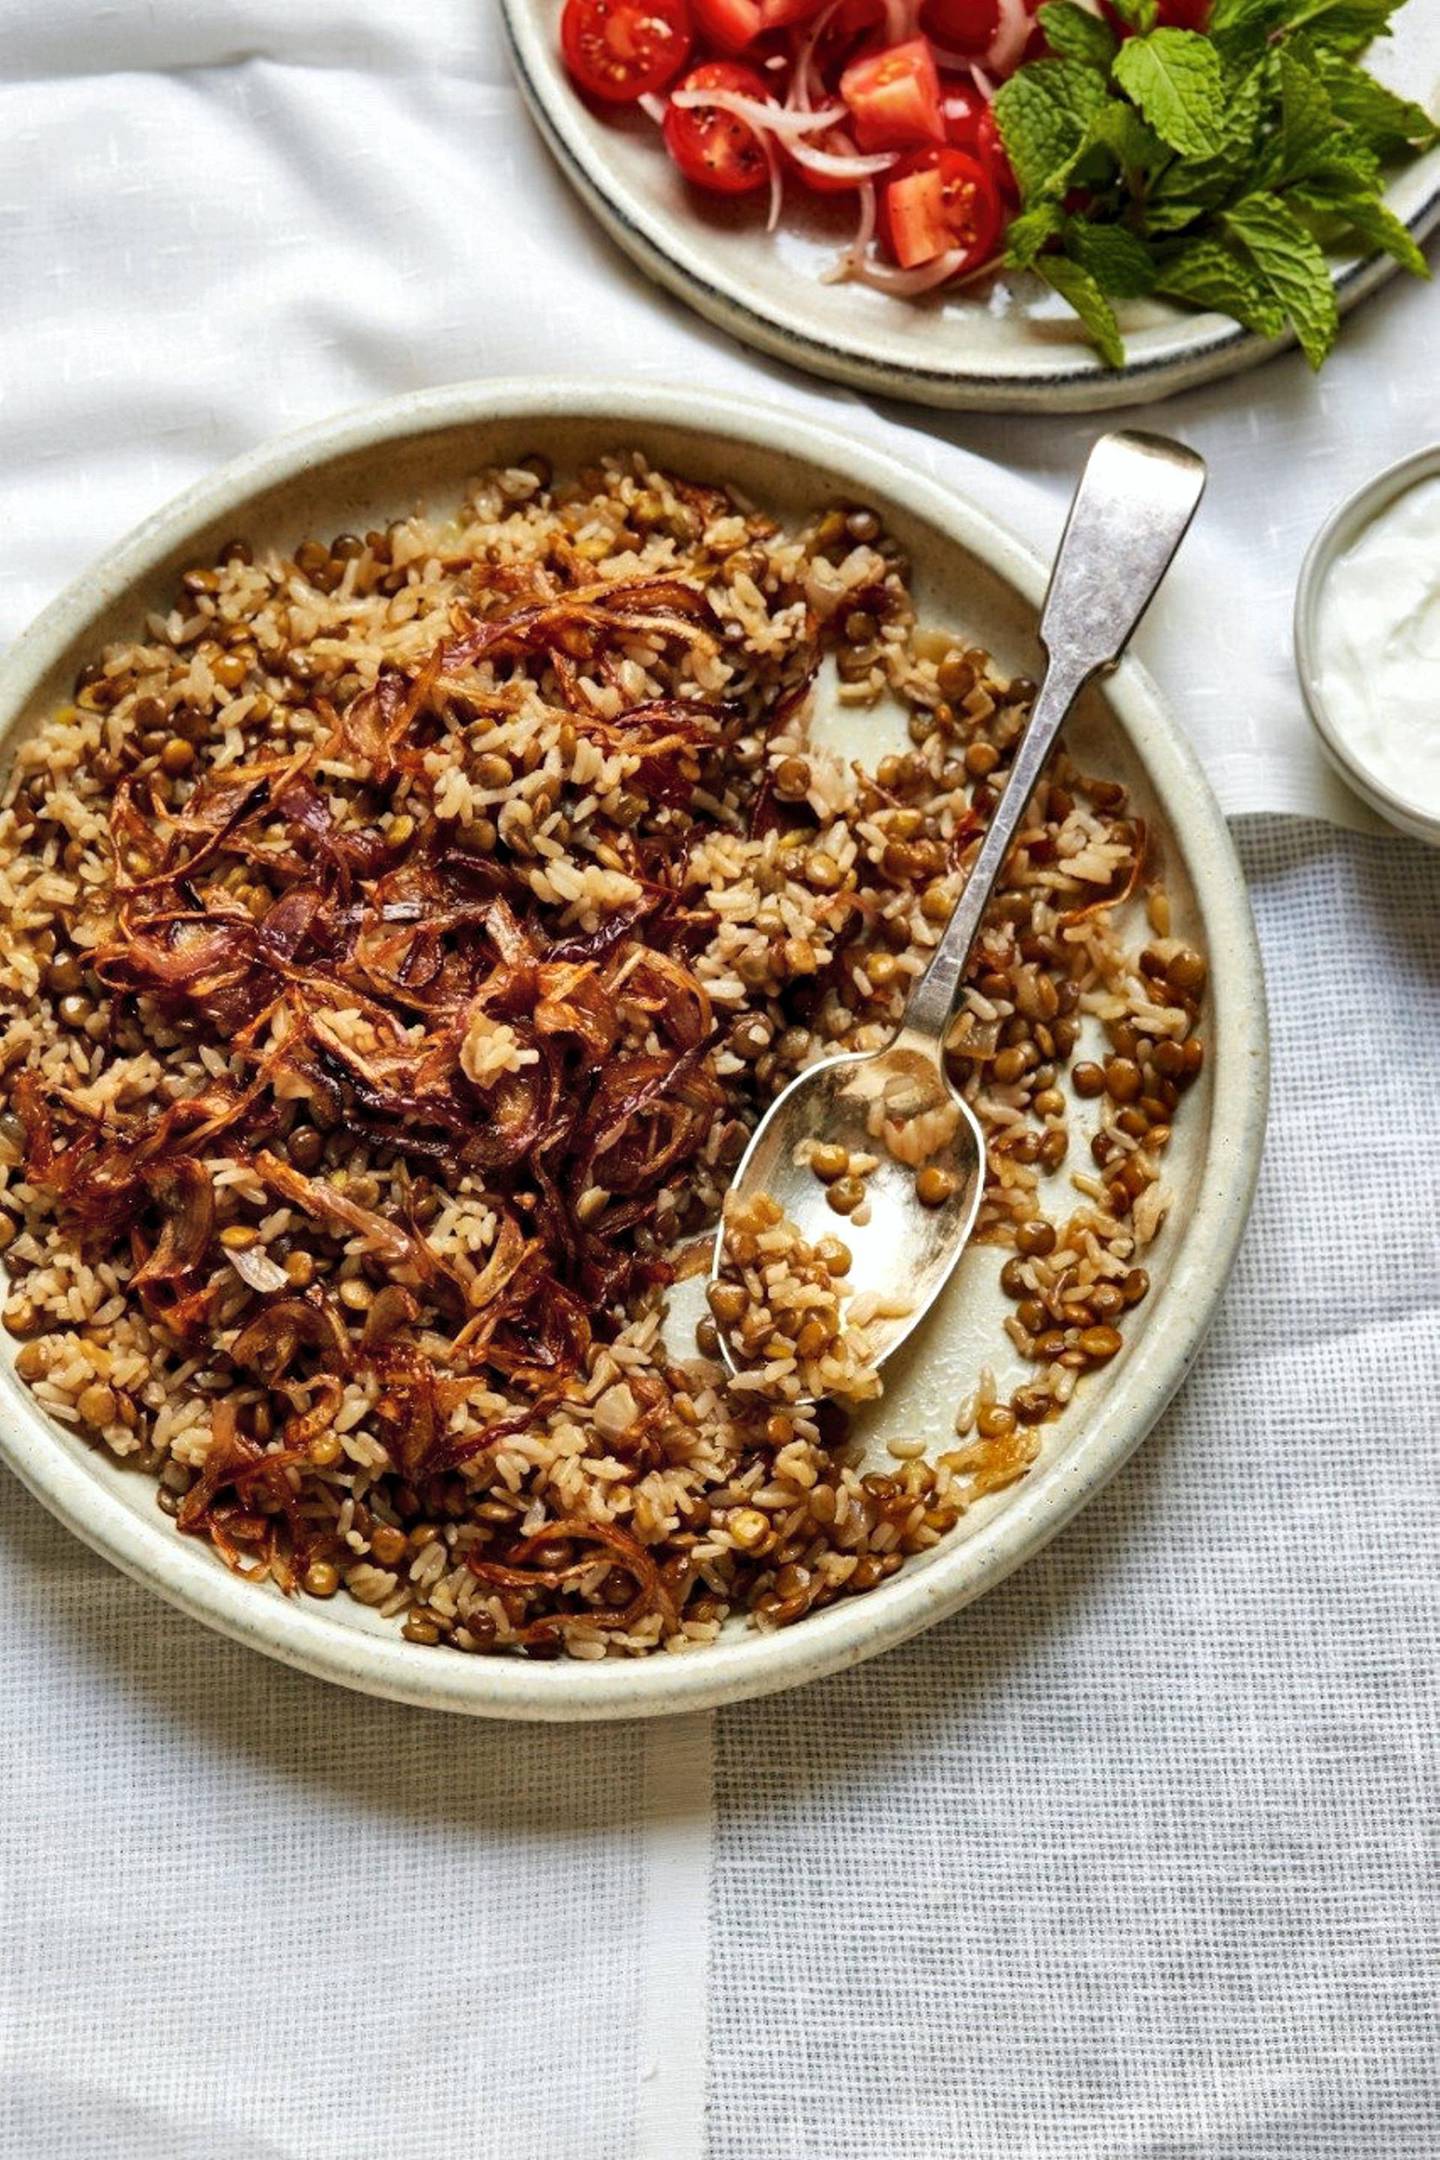 Mujadara is a Levant recipe made with rice and lentils. Courtesy of Zahra Abdalla